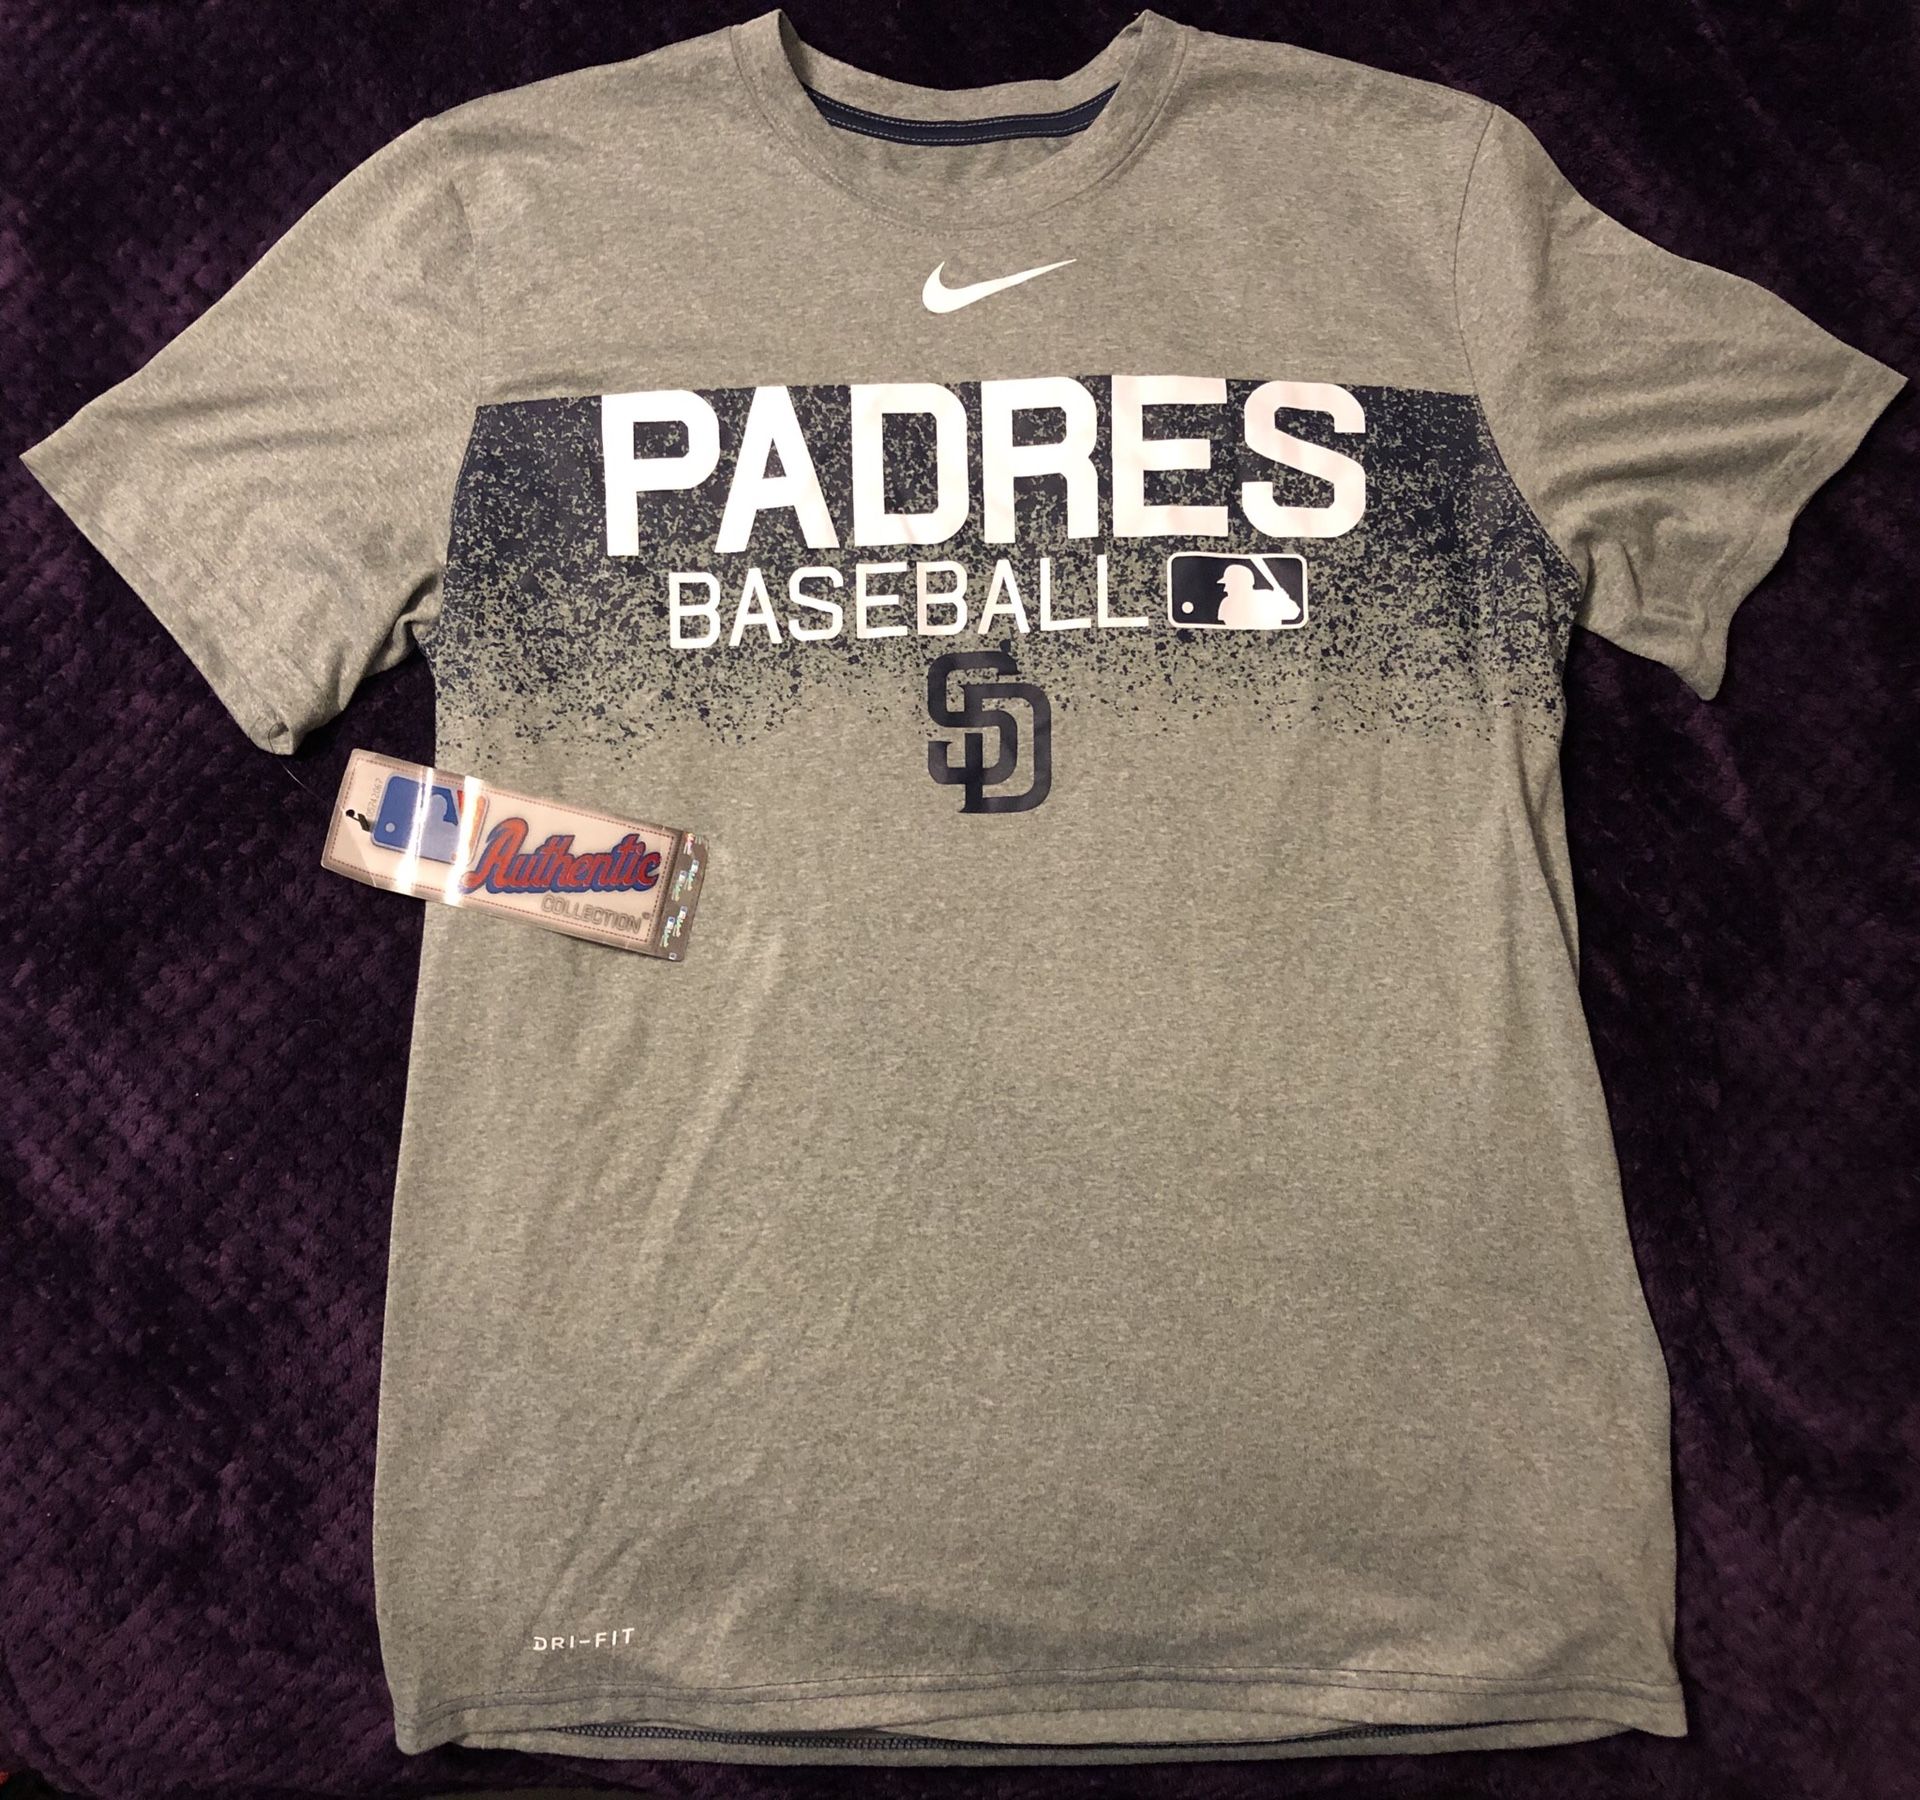 Nike Dri-Fit San Diego Padres Baseball T-Shirt for Sale in Hacienda  Heights, CA - OfferUp